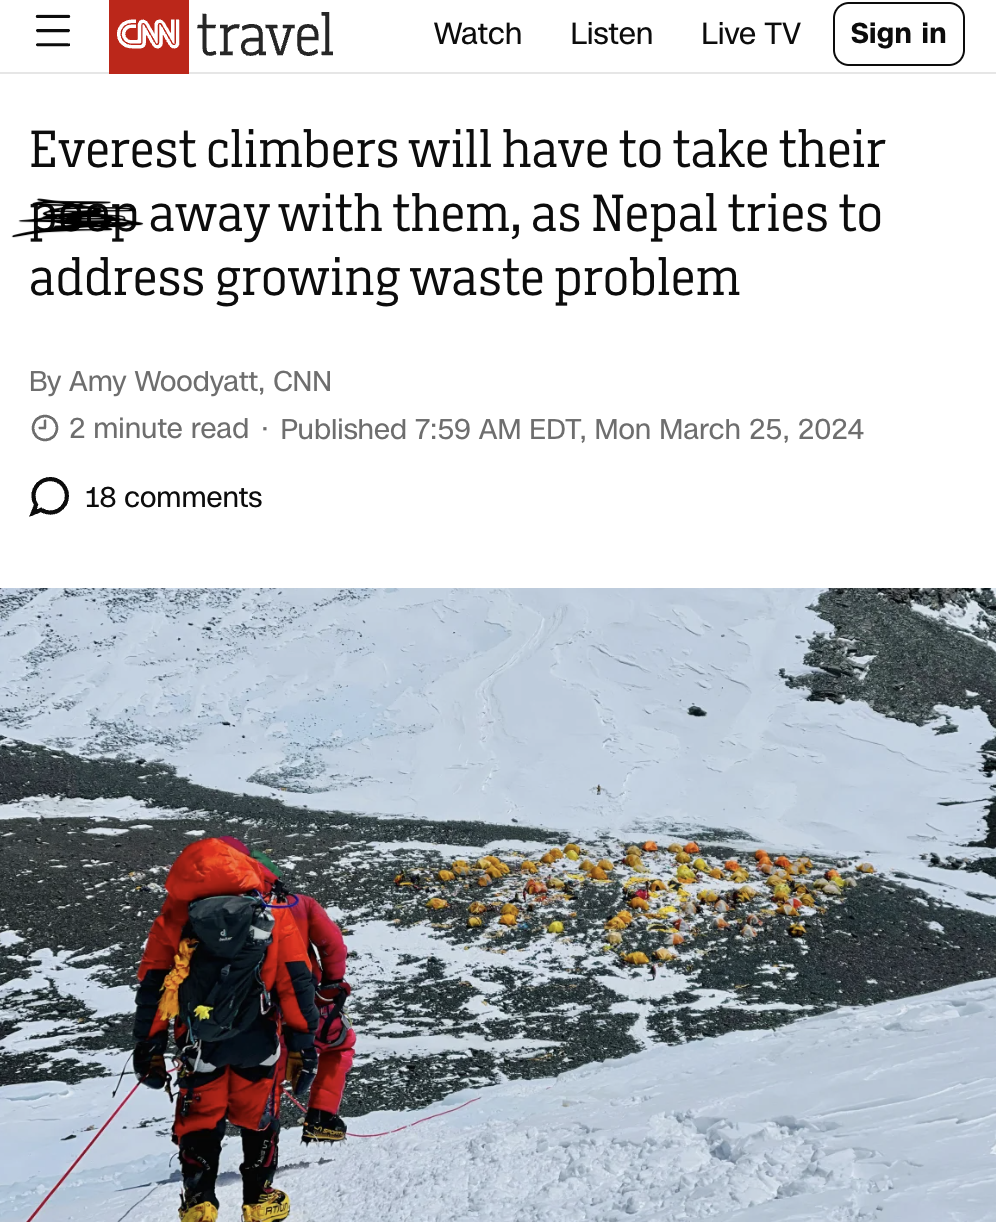 everest chinese rescue - Cnn travel Watch Listen Live Tv Sign in Everest climbers will have to take their prep away with them, as Nepal tries to address growing waste problem By Amy Woodyatt, Cnn 2 minute read Published Edt, Mon 18